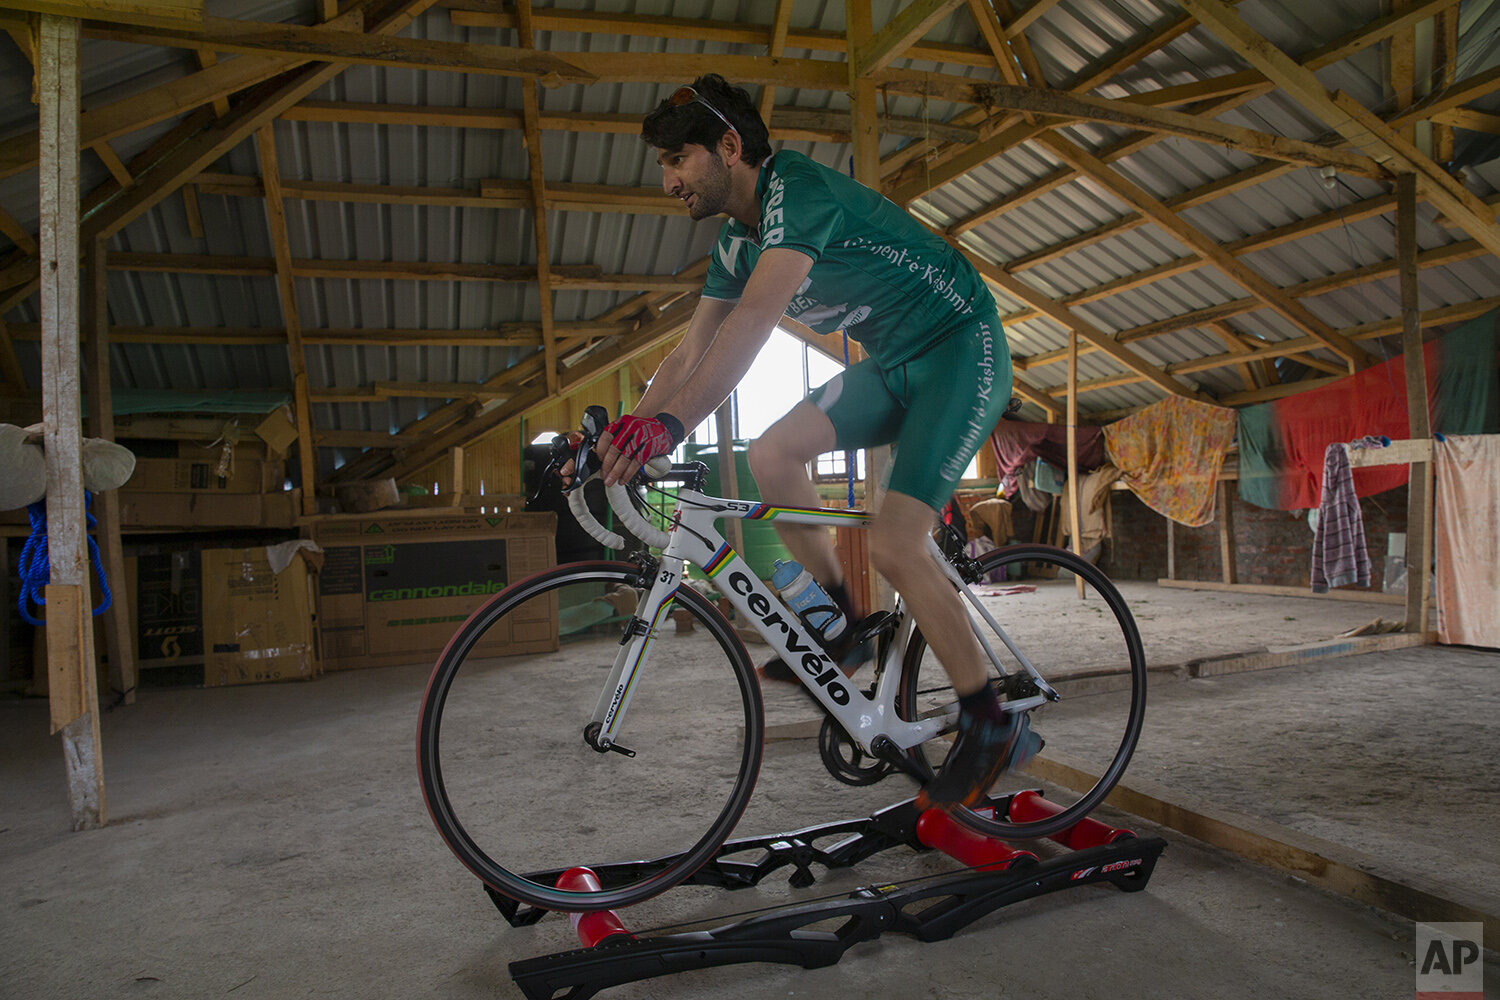  Umer Nabi cycles on top of rollers inside his home in Burzahamahe, on the outskirts of Srinagar, Indian controlled Kashmir, April 28, 2020. Lockdown for the 7 million residents of Kashmir is nothing new and the ongoing restrictions due to the pandem